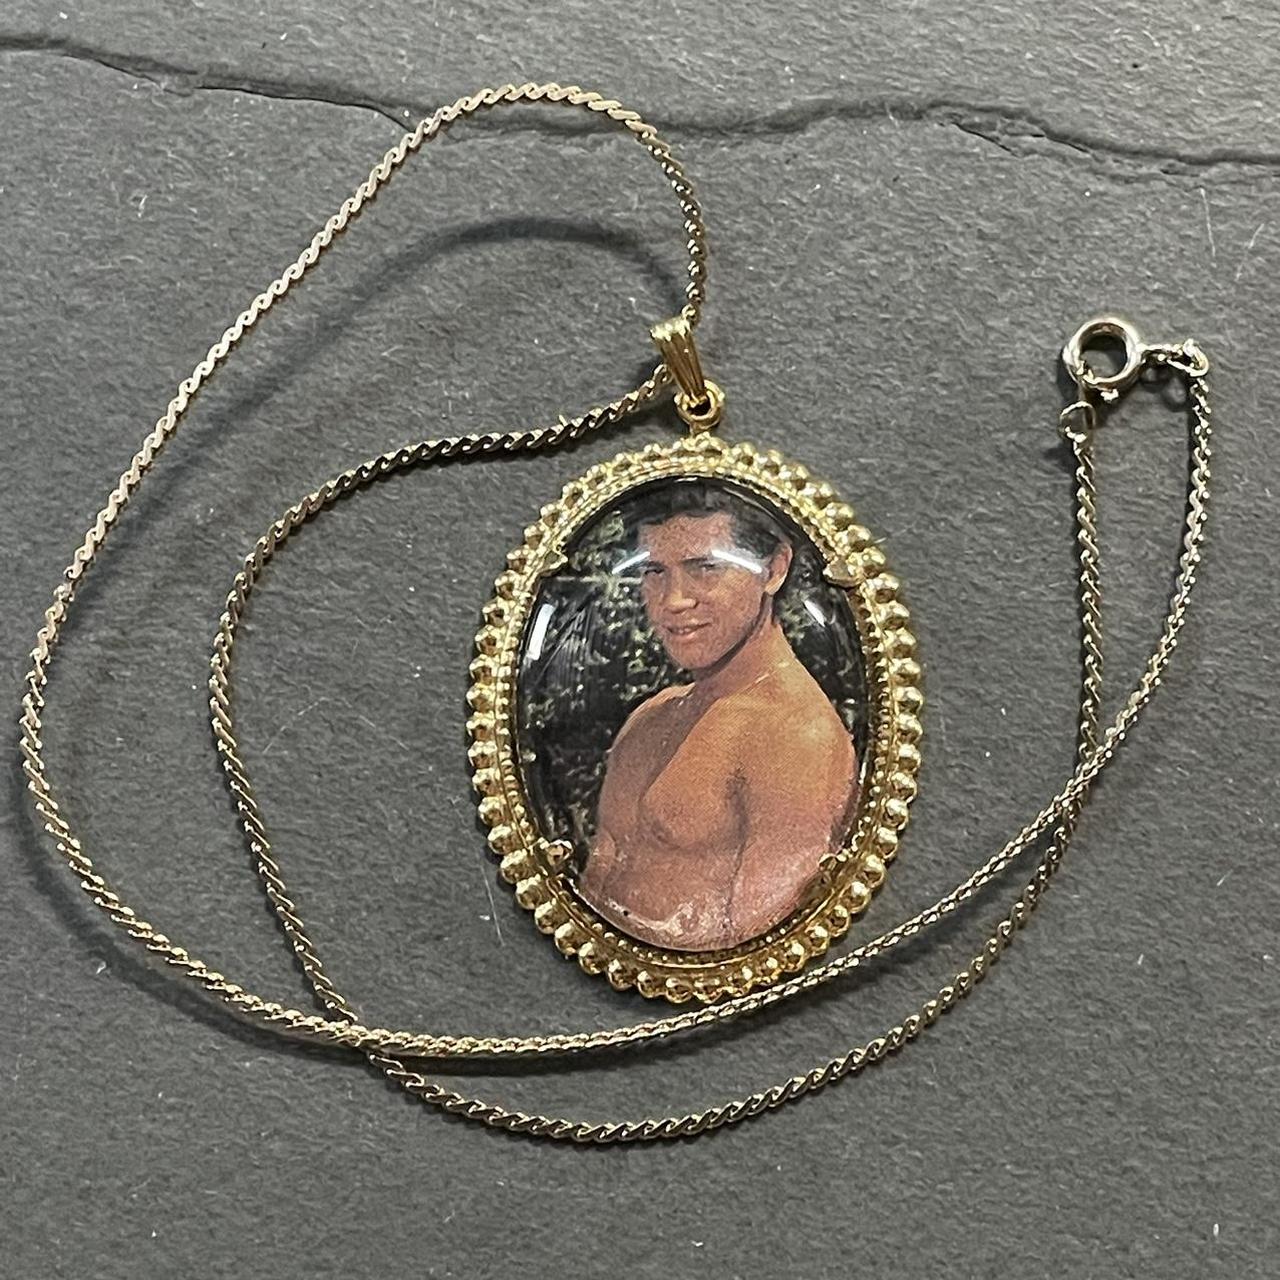 Chain Porn Star - Vintage 80s male porn star necklace. This gold tone... - Depop